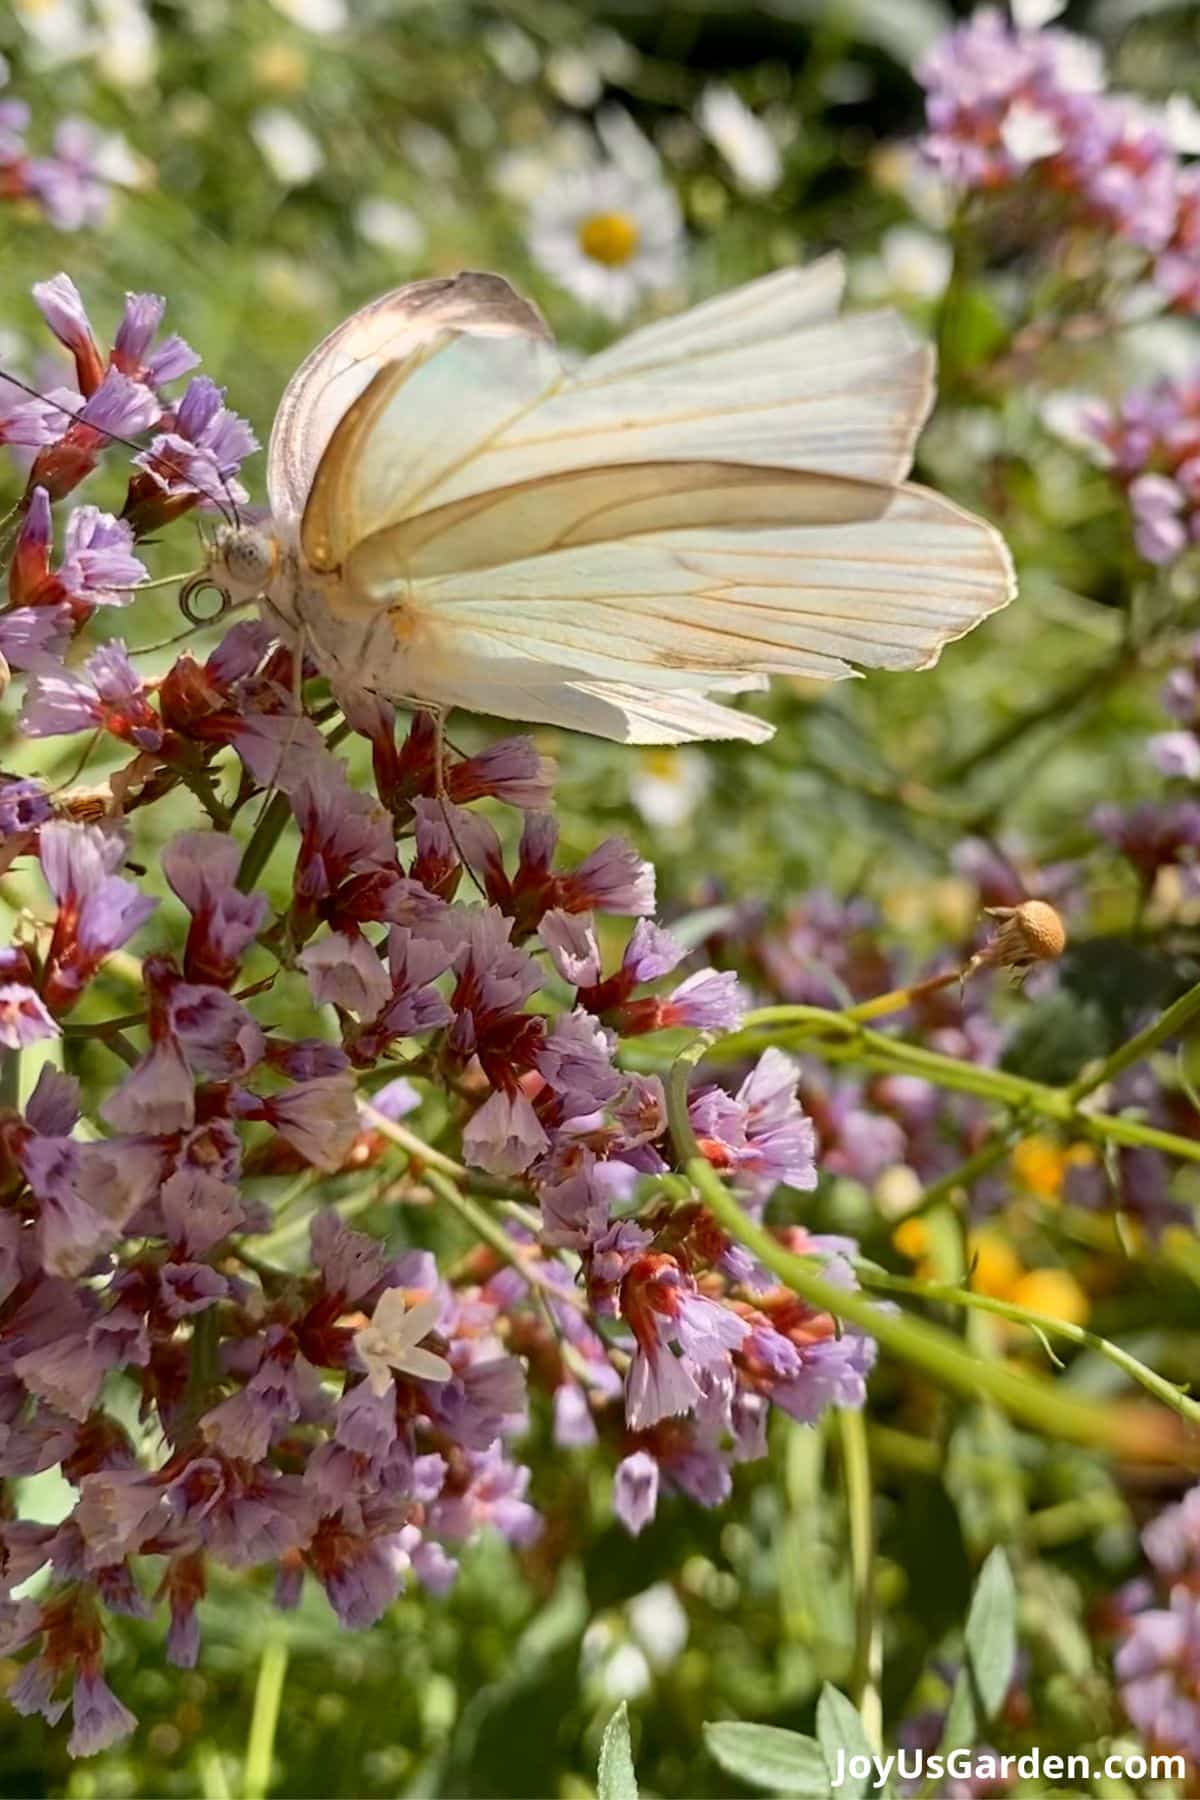 close up photo of white ascia butterfly on a statice flower in shades of pink purple red 